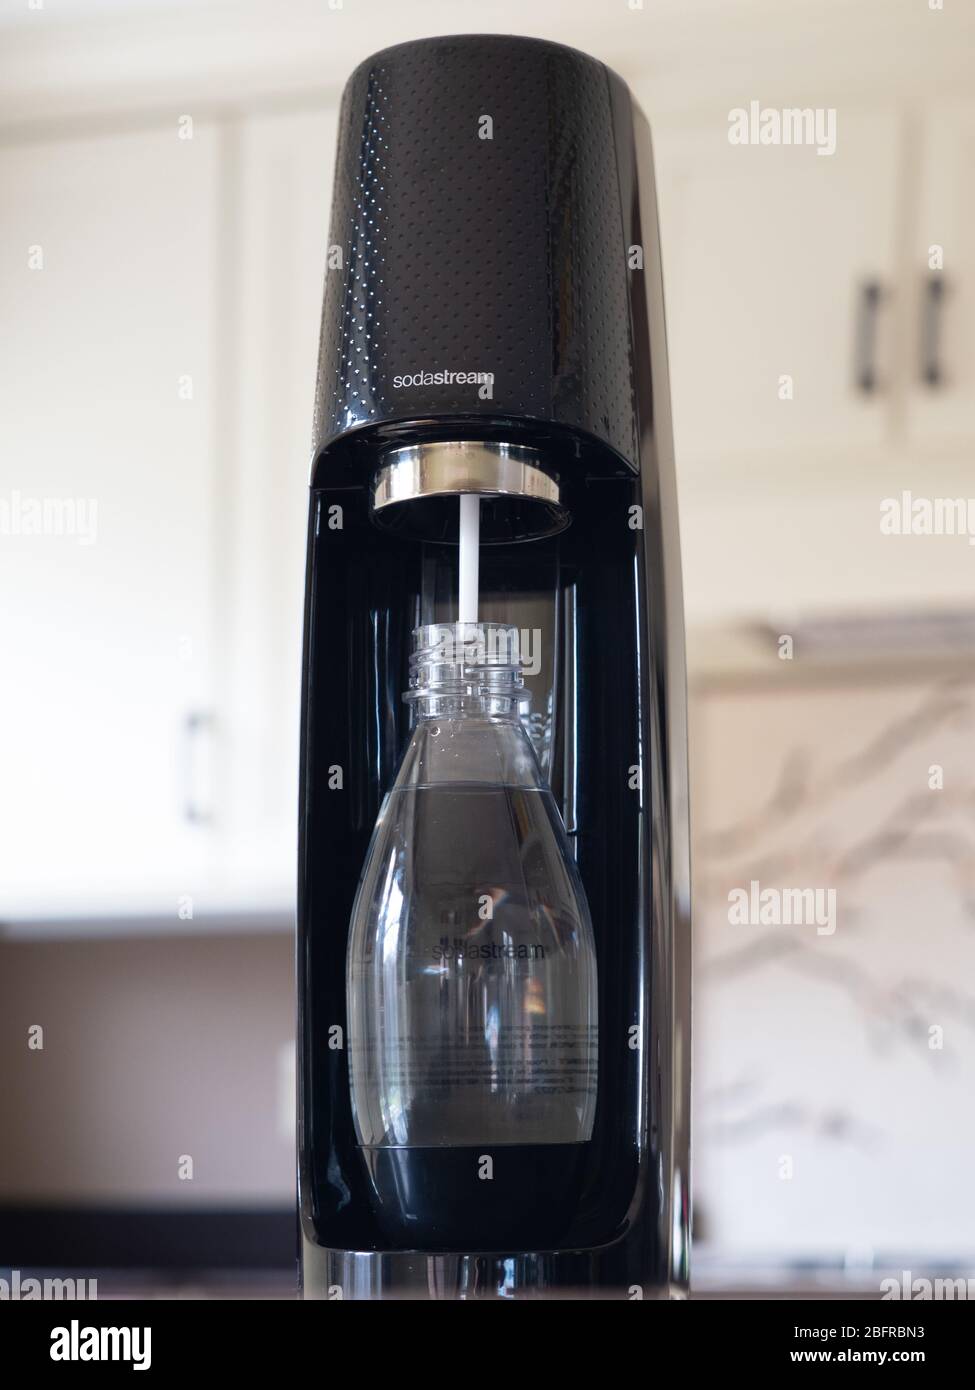 Black Sodastream carbonator and reusable Sodastream plastic bottle with water, photographed at eye level in modern kitchen with off white cabinets. Stock Photo